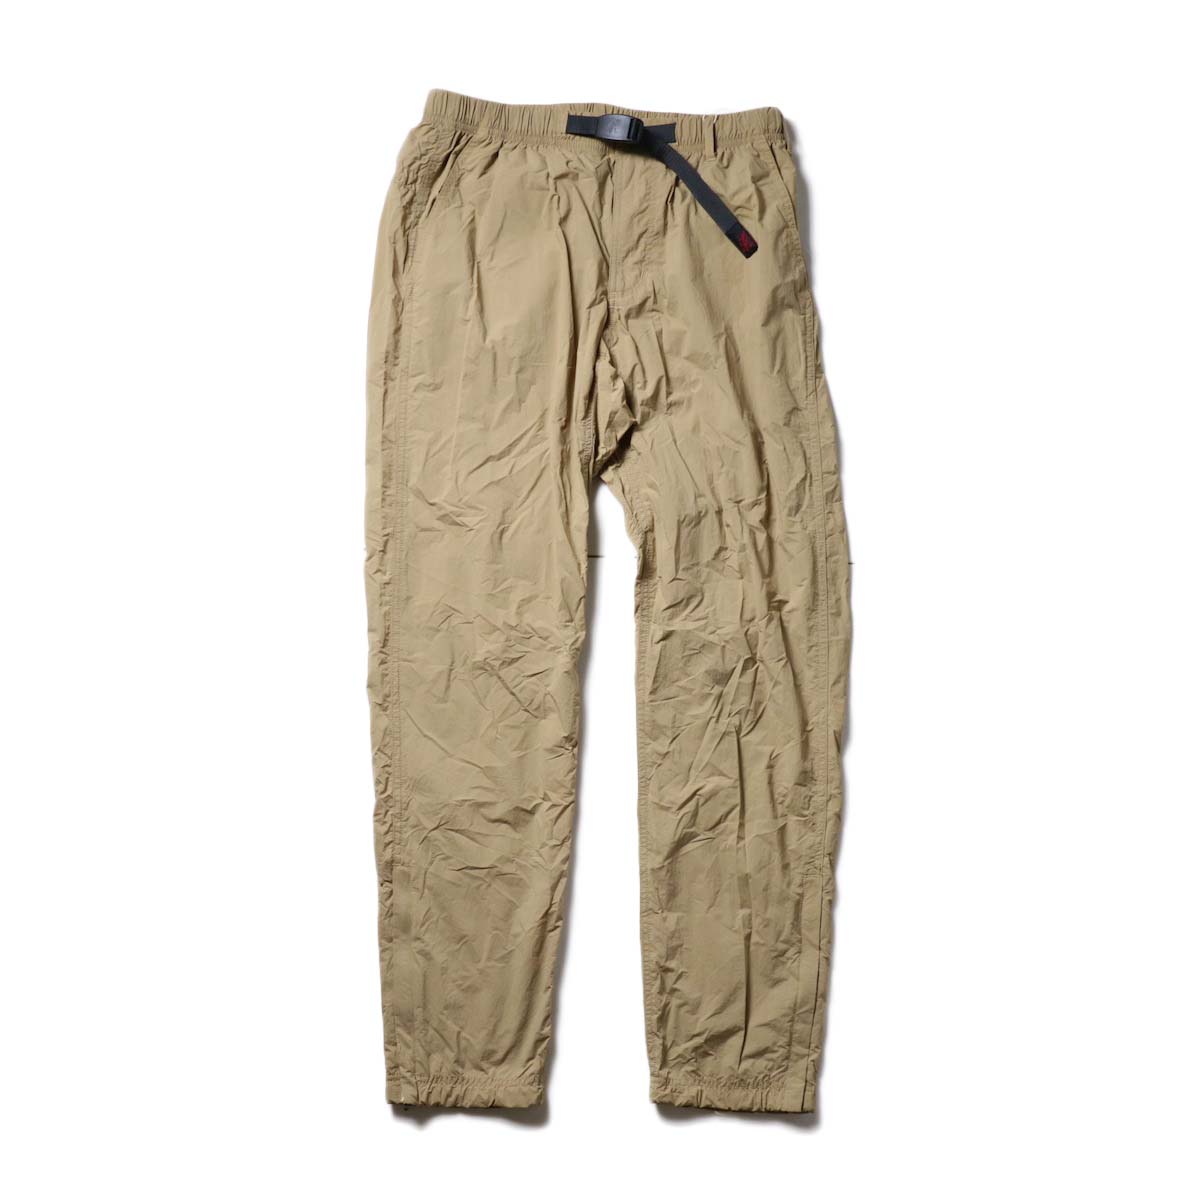 GRAMICCI / PACKABLE TRACK PANTS (Chino)